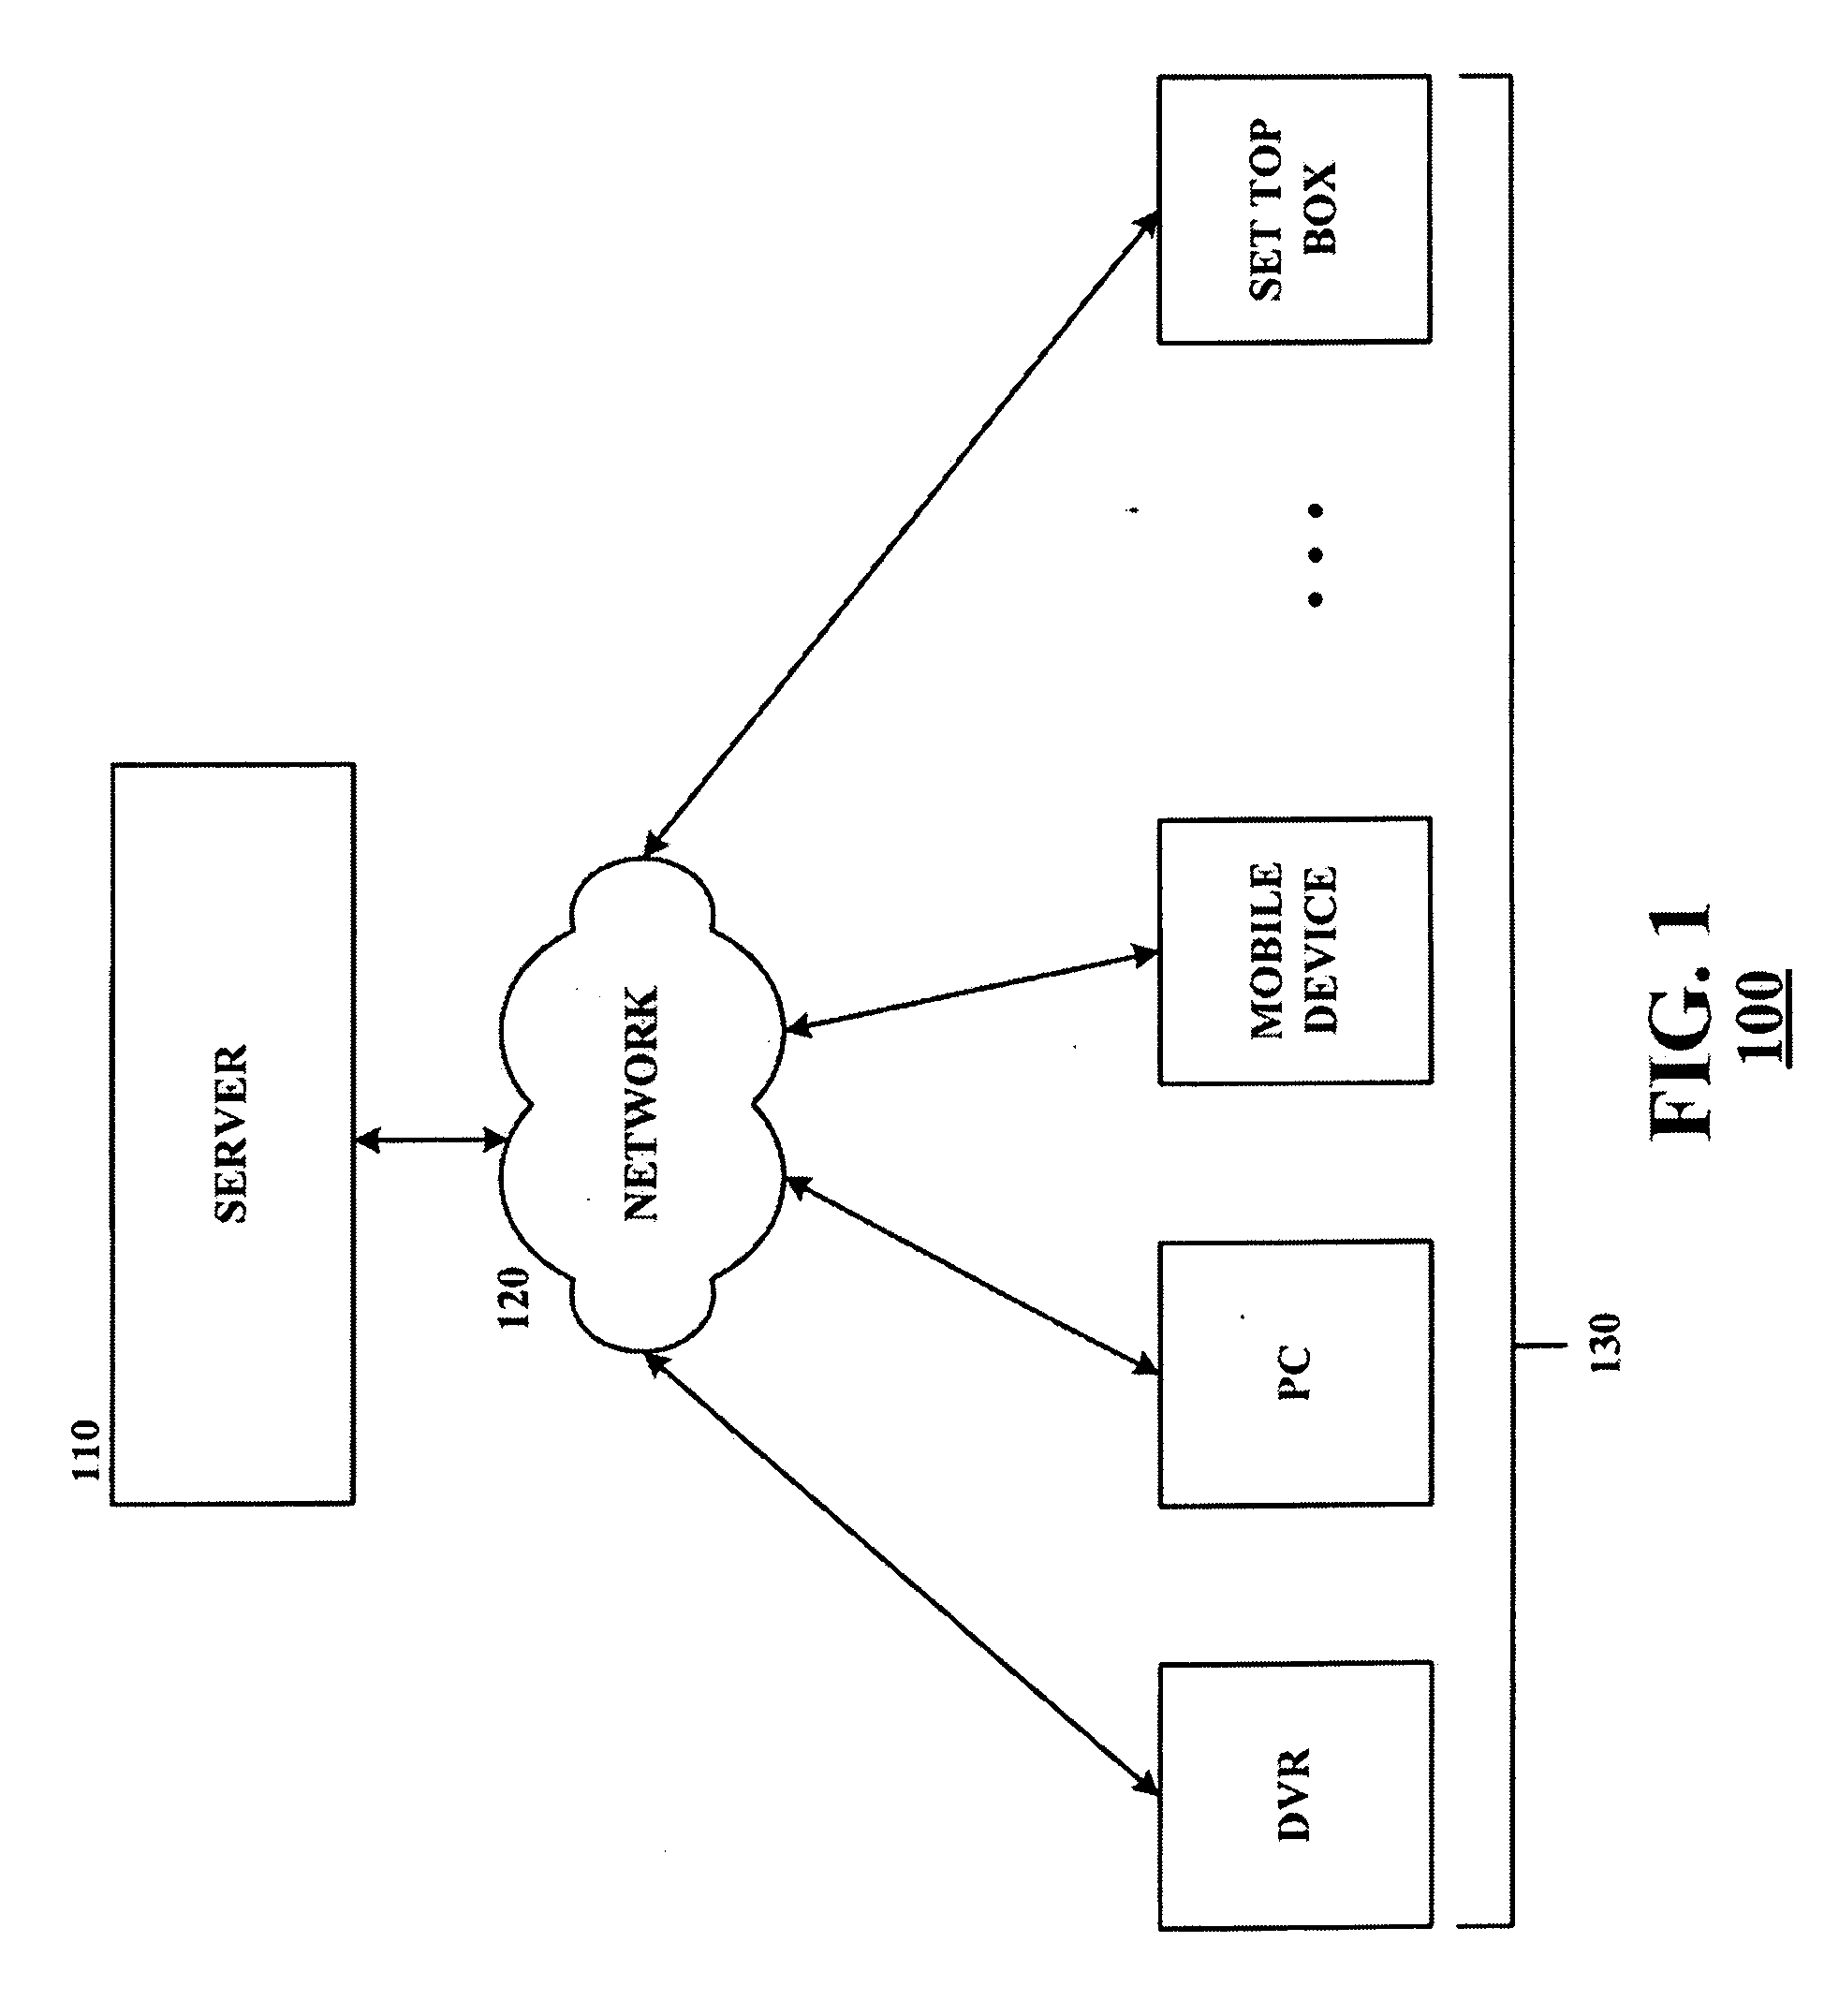 System and method for an extensible media player